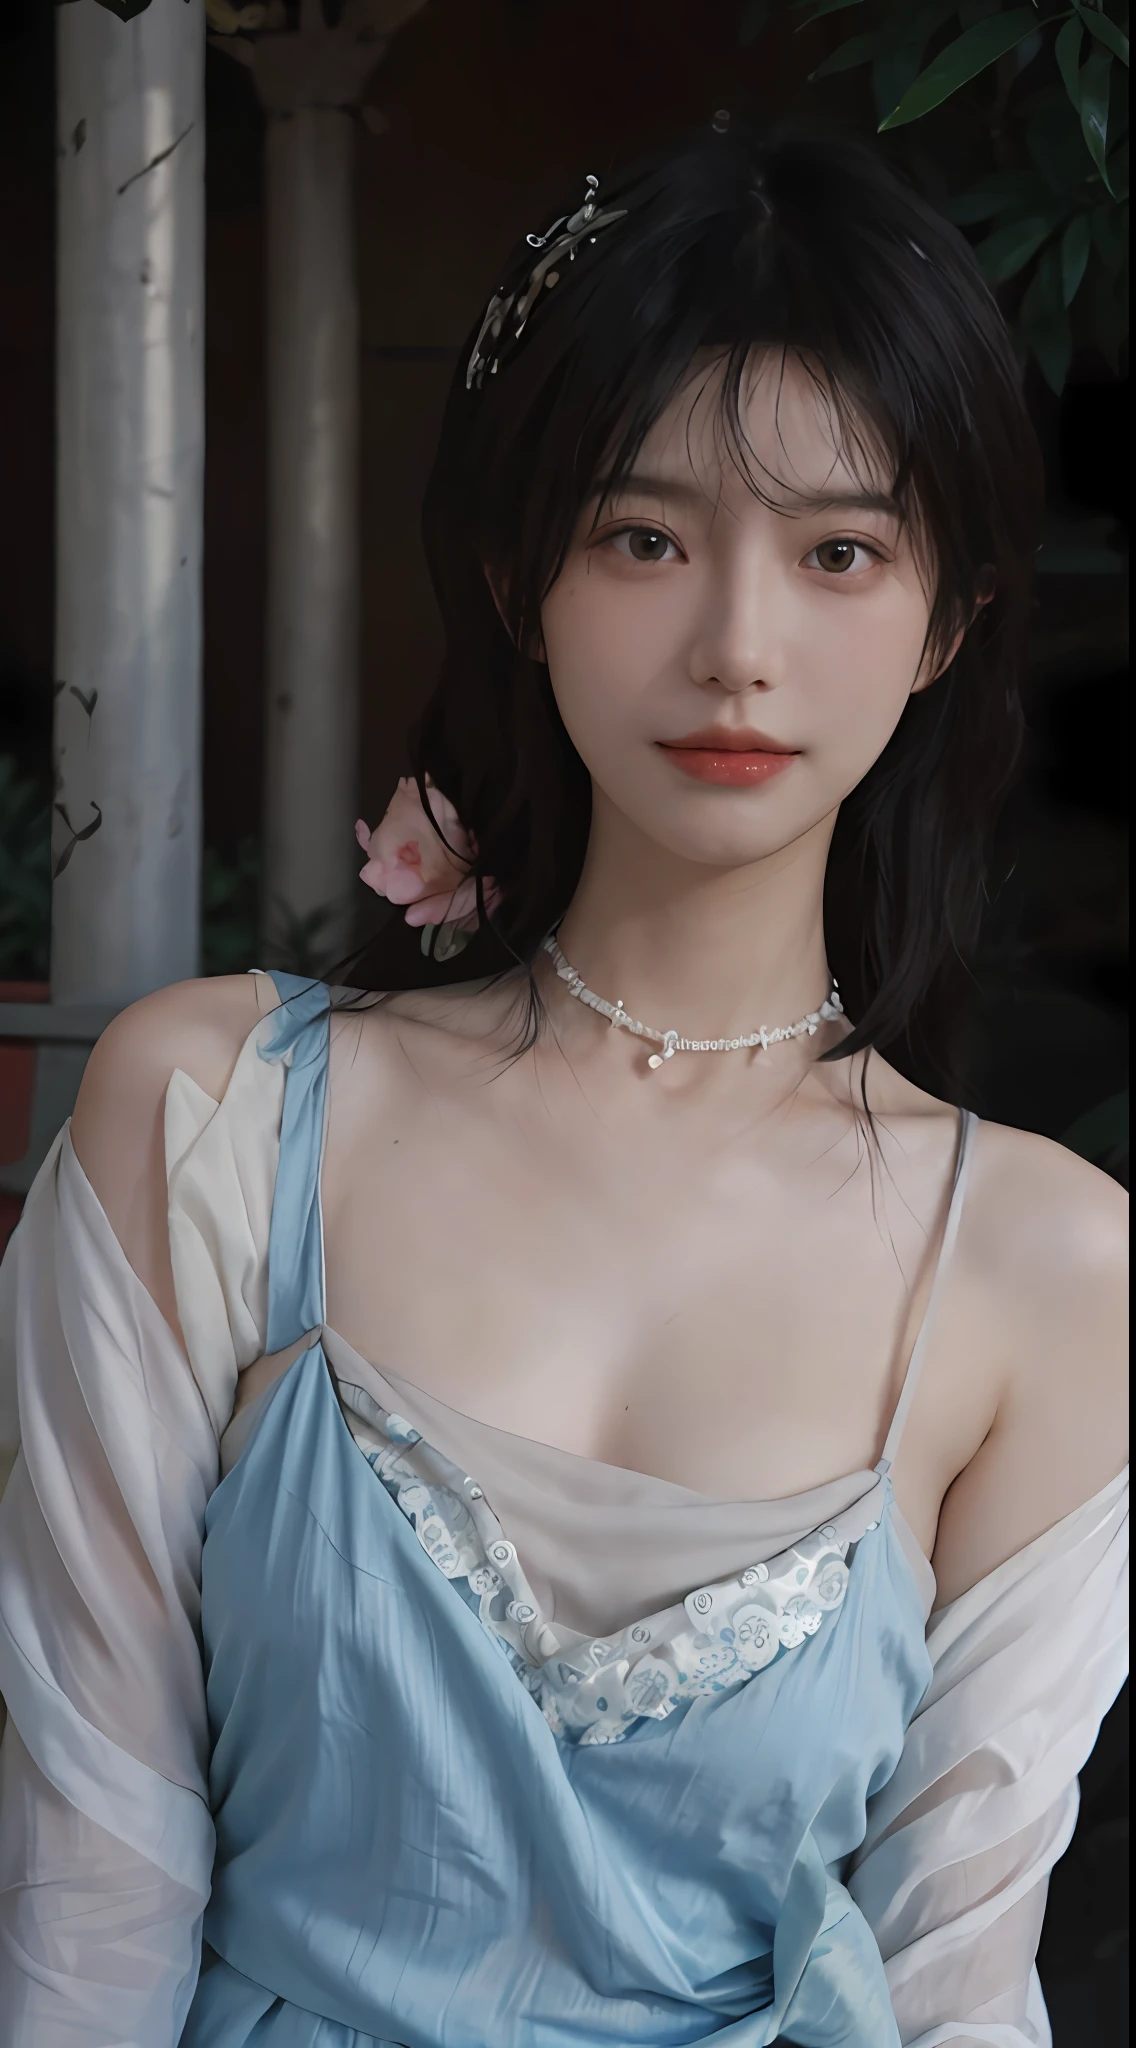 best qualtiy， Ultra-high resolution， （realisticlying：1.4），cute hairpin，Baoyu Girl， A pair of clear and moving peach blossom eyes,Royal Sister，sunshine on face，with long coiled hair，（ln the forest：1.4），（choker necklace：1.2），（Fair skin：1.4），（full bodyesbian：1.2）a sense of atmosphere，a beauty girl， ssmile，head straight-looking at viewer， closeup cleavage ，(Photorealistic:1.4),1girll,sexly,(Upper body:1.4),(Wet body),(:1.2)